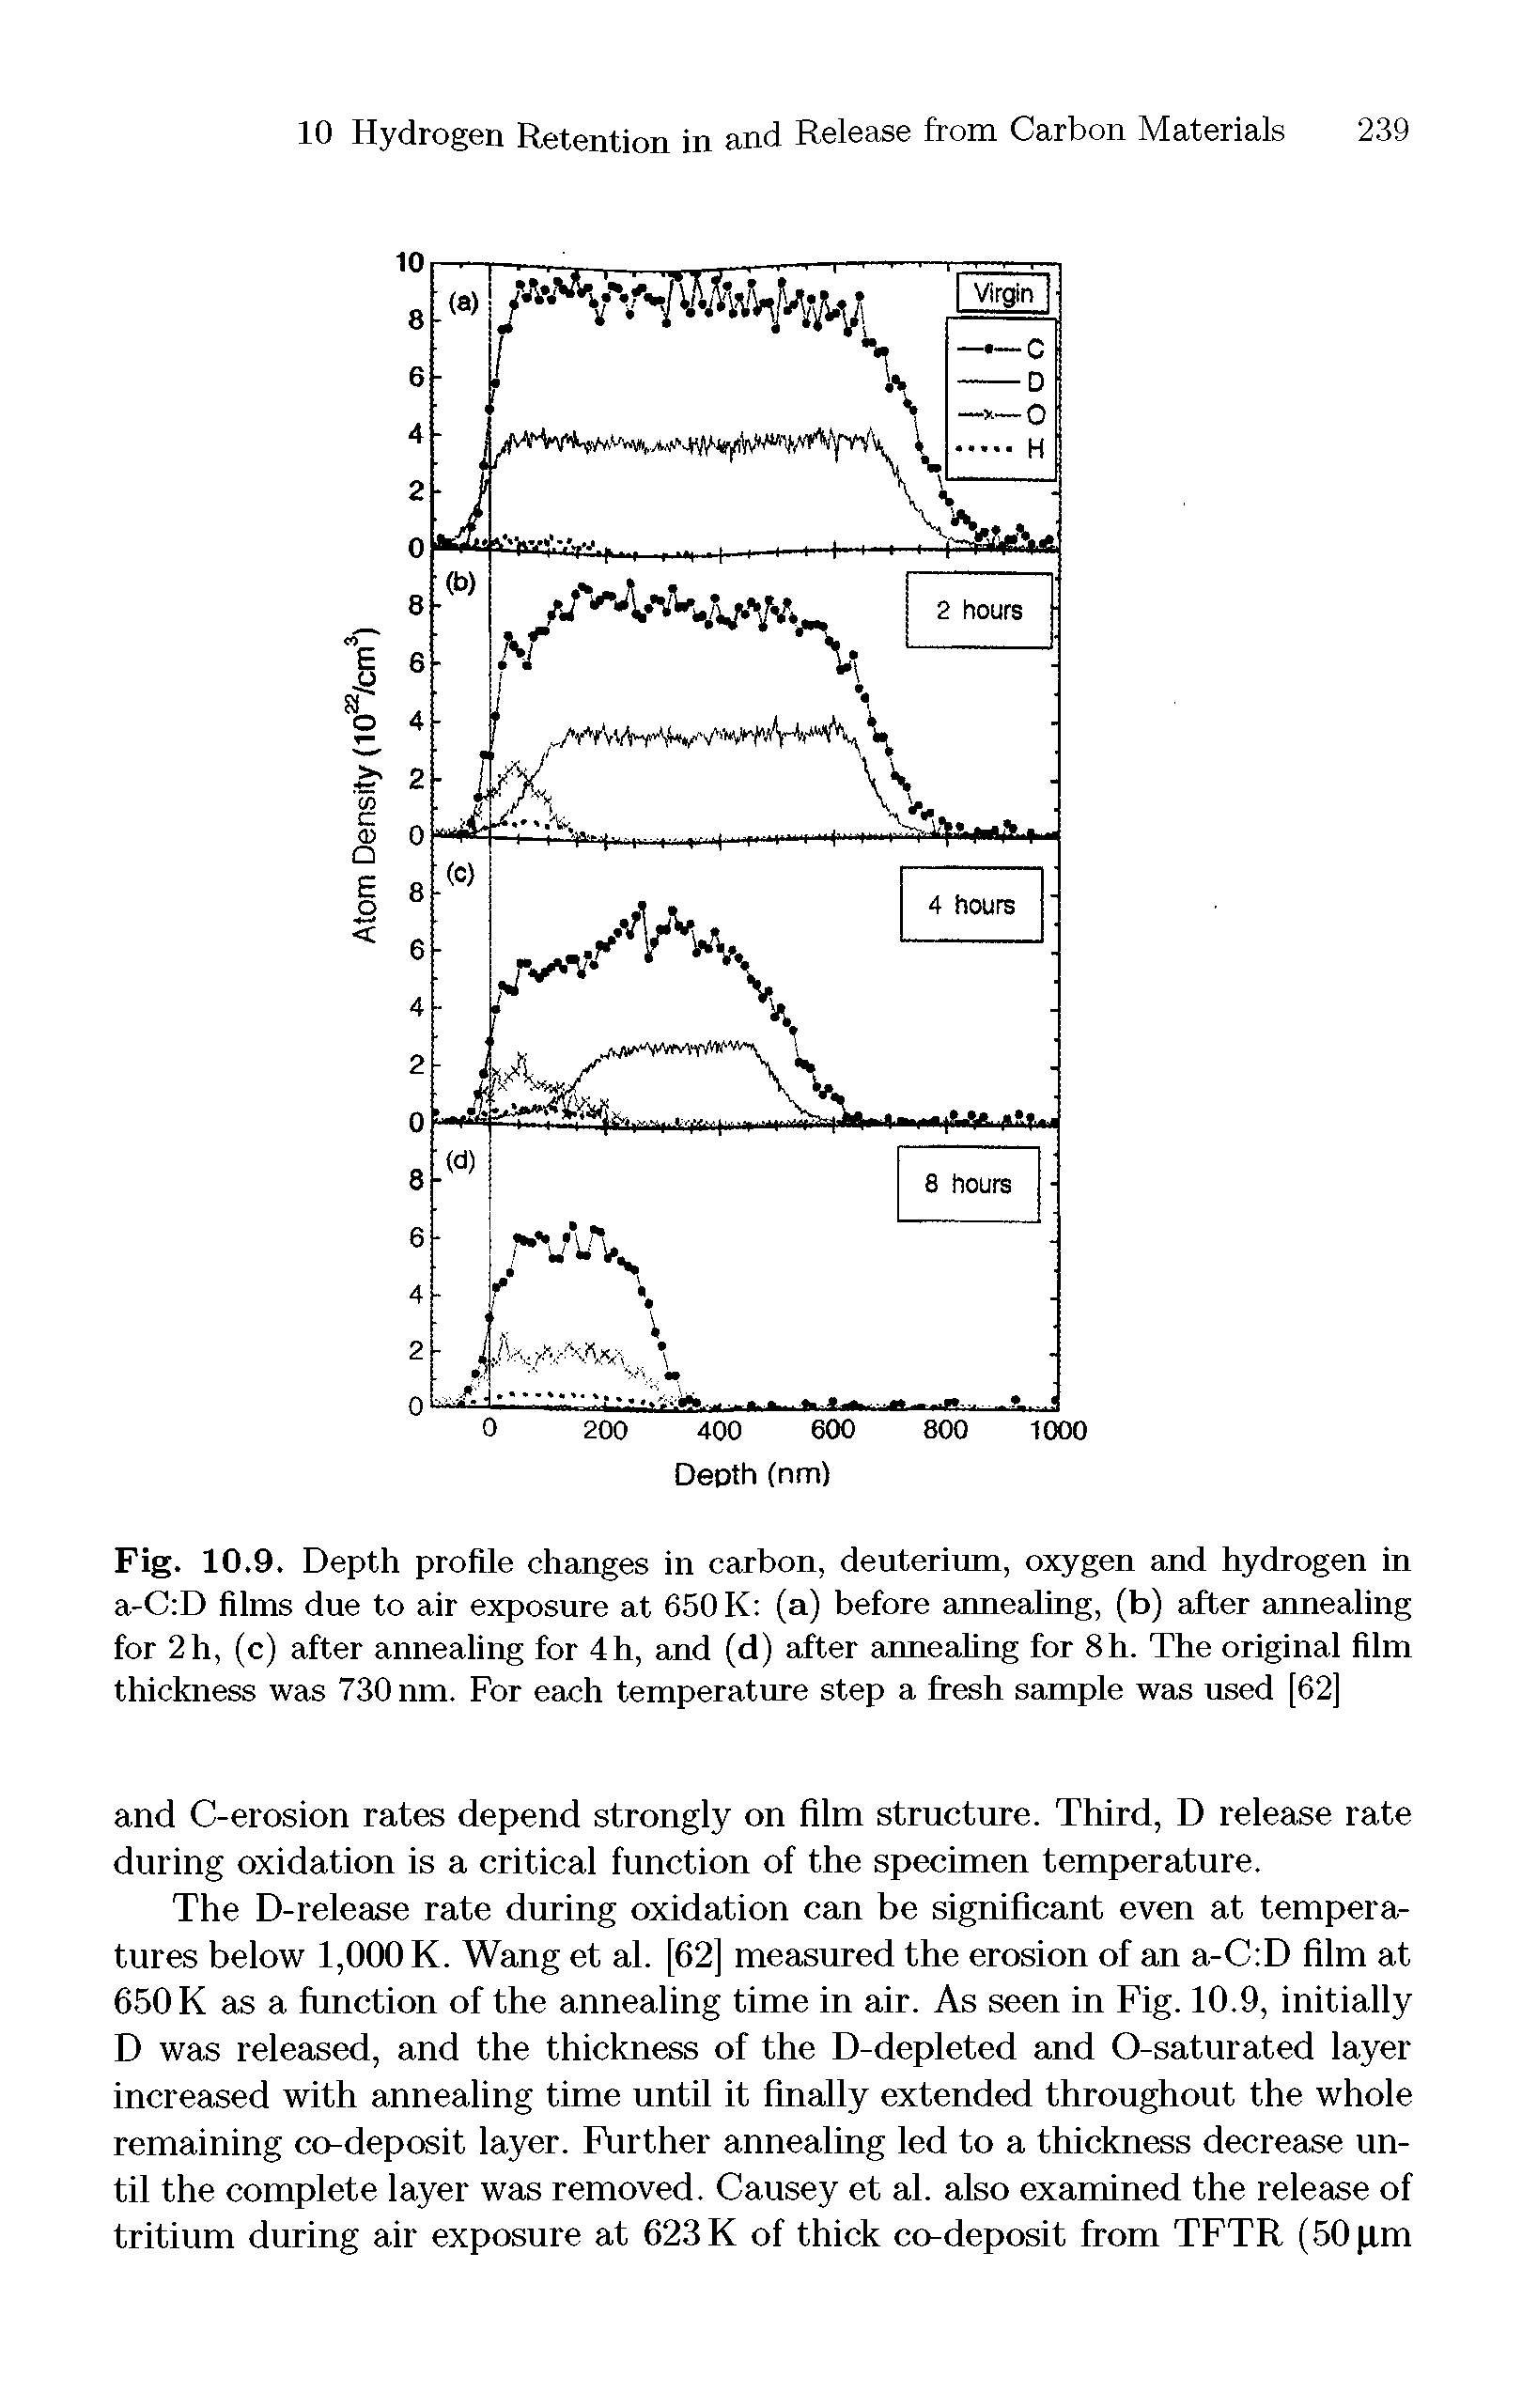 Fig. 10.9. Depth profile changes in carbon, deuterium, oxygen and hydrogen in a-C D films due to air exposure at 650 K (a) before annealing, (b) after annealing for 2h, (c) after annealing for 4h, and (d) after annealing for 8h. The original film thickness was 730 nm. For each temperature step a fresh sample was used [62]...